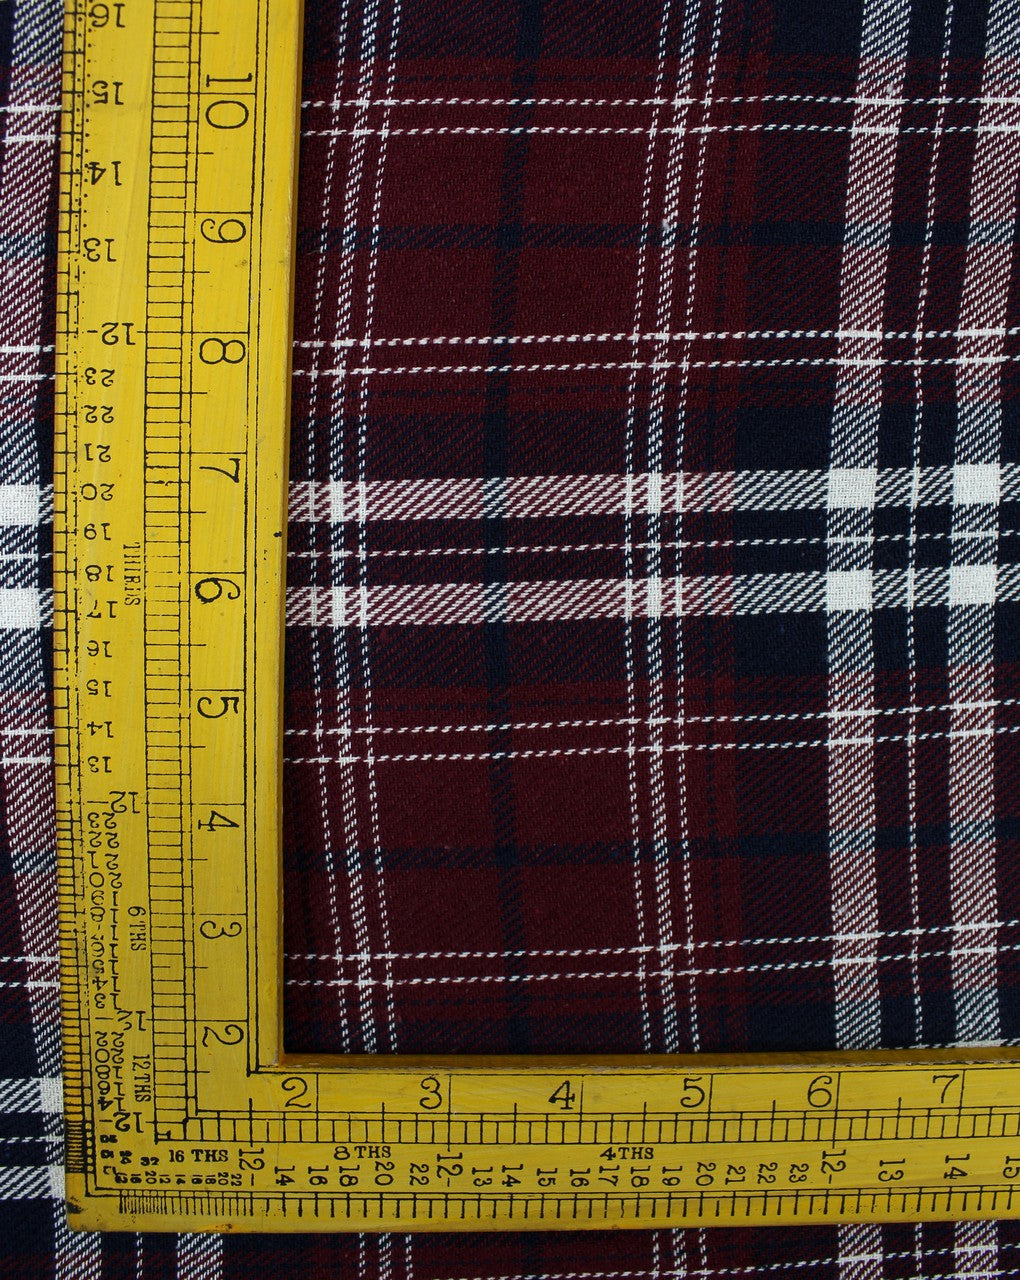 Maroon And Black Checks Yarn Dyed Cotton Fabric